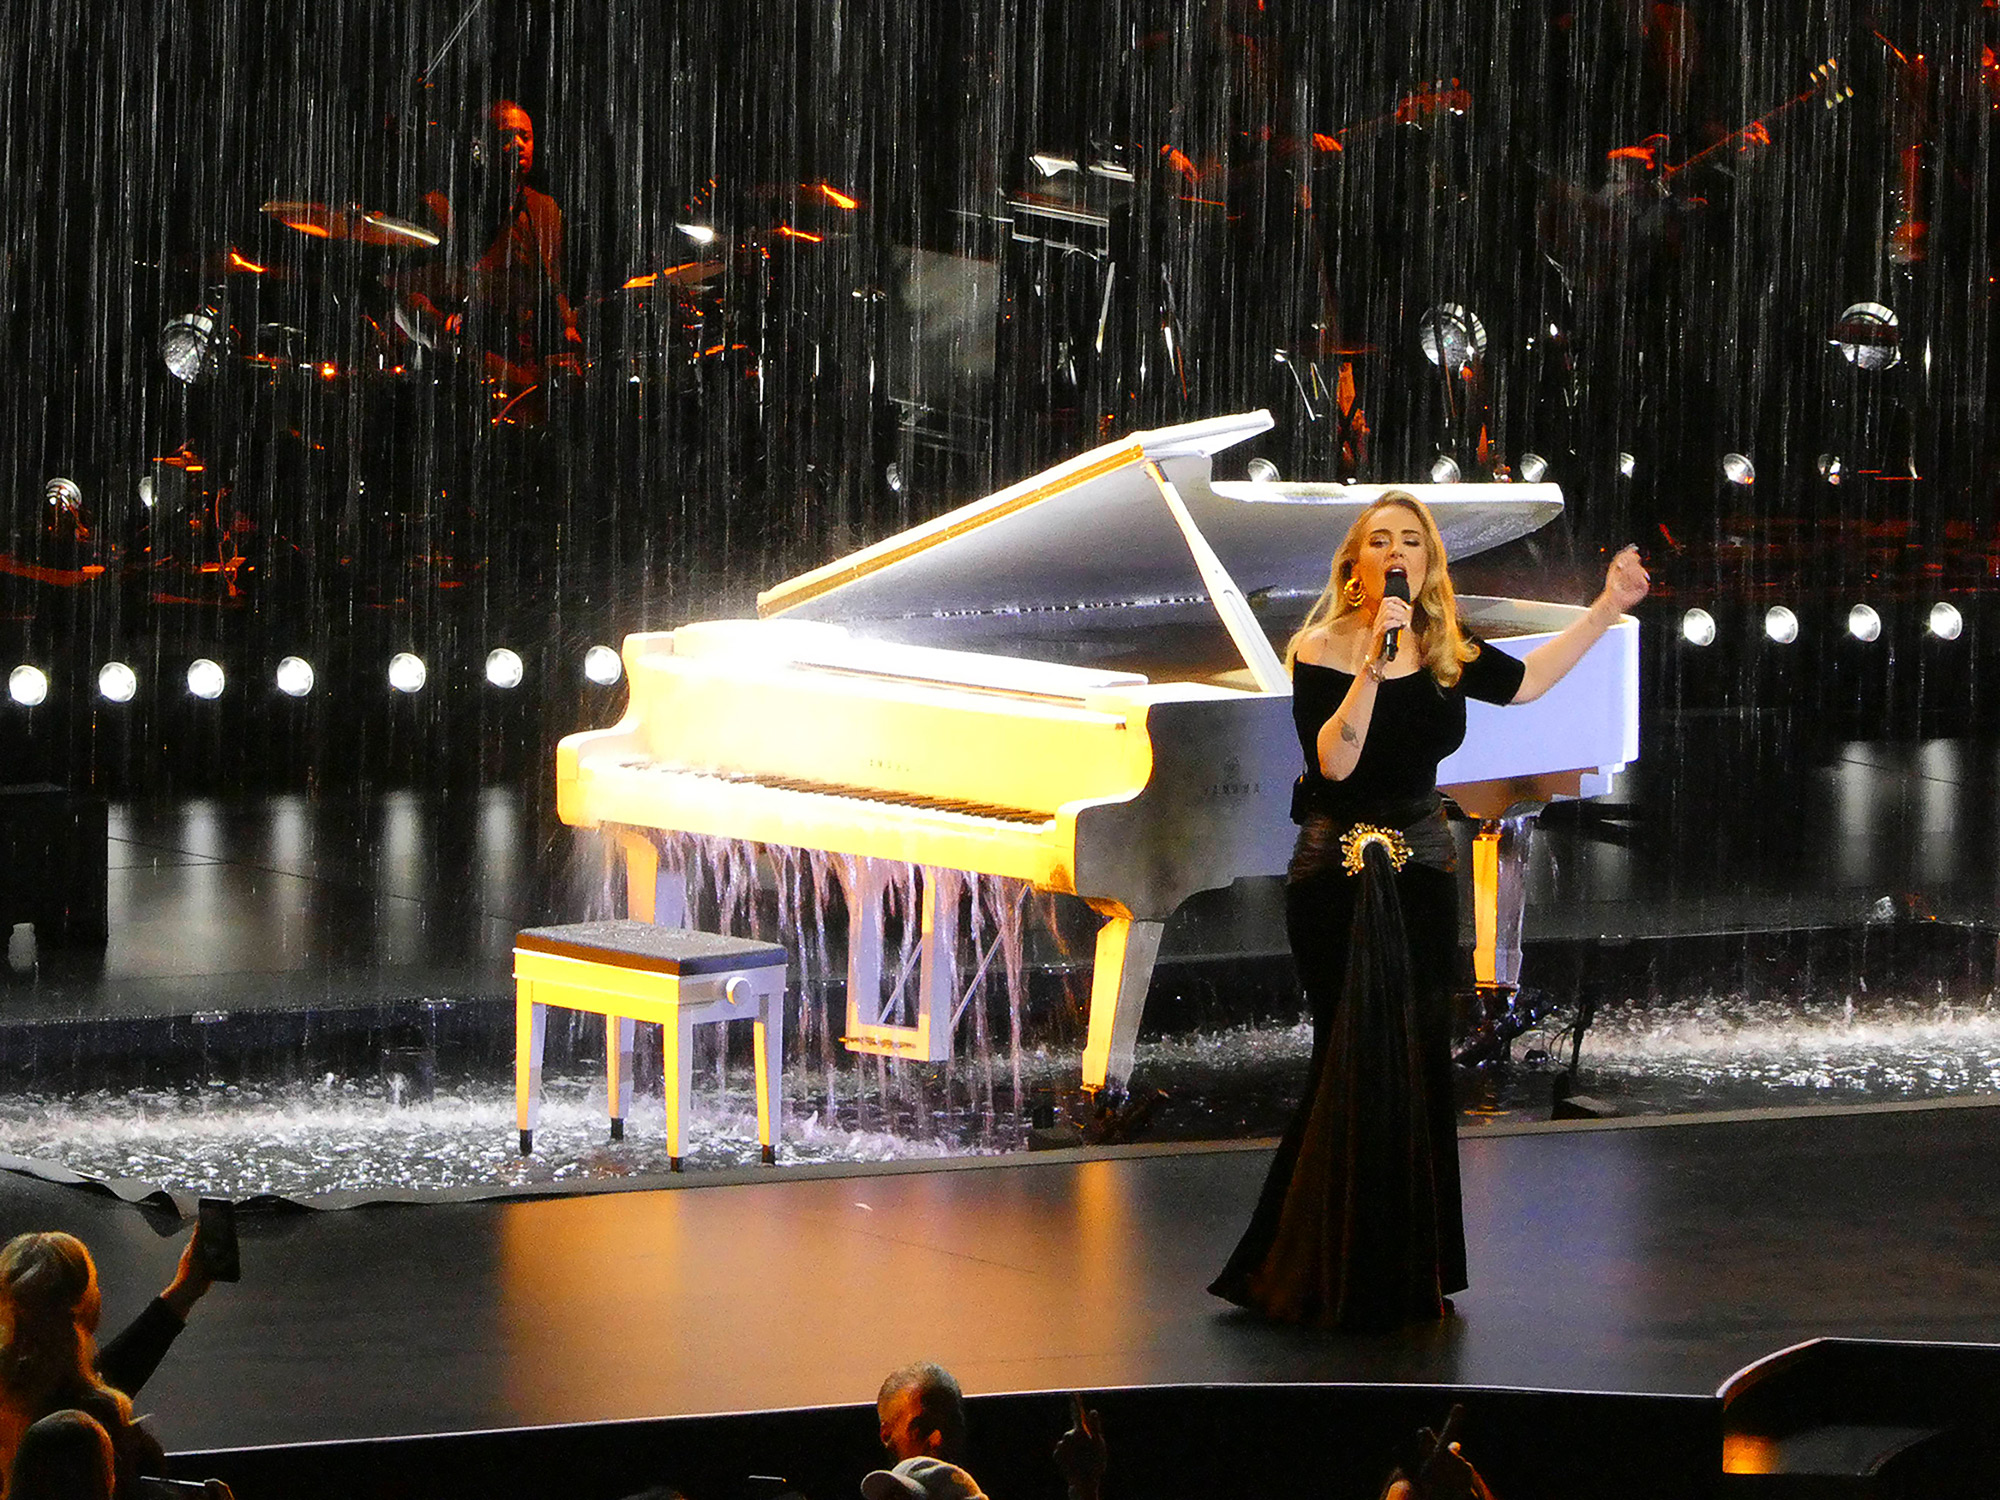 Inside the First Night of Adele's Rescheduled Las Vegas Residency